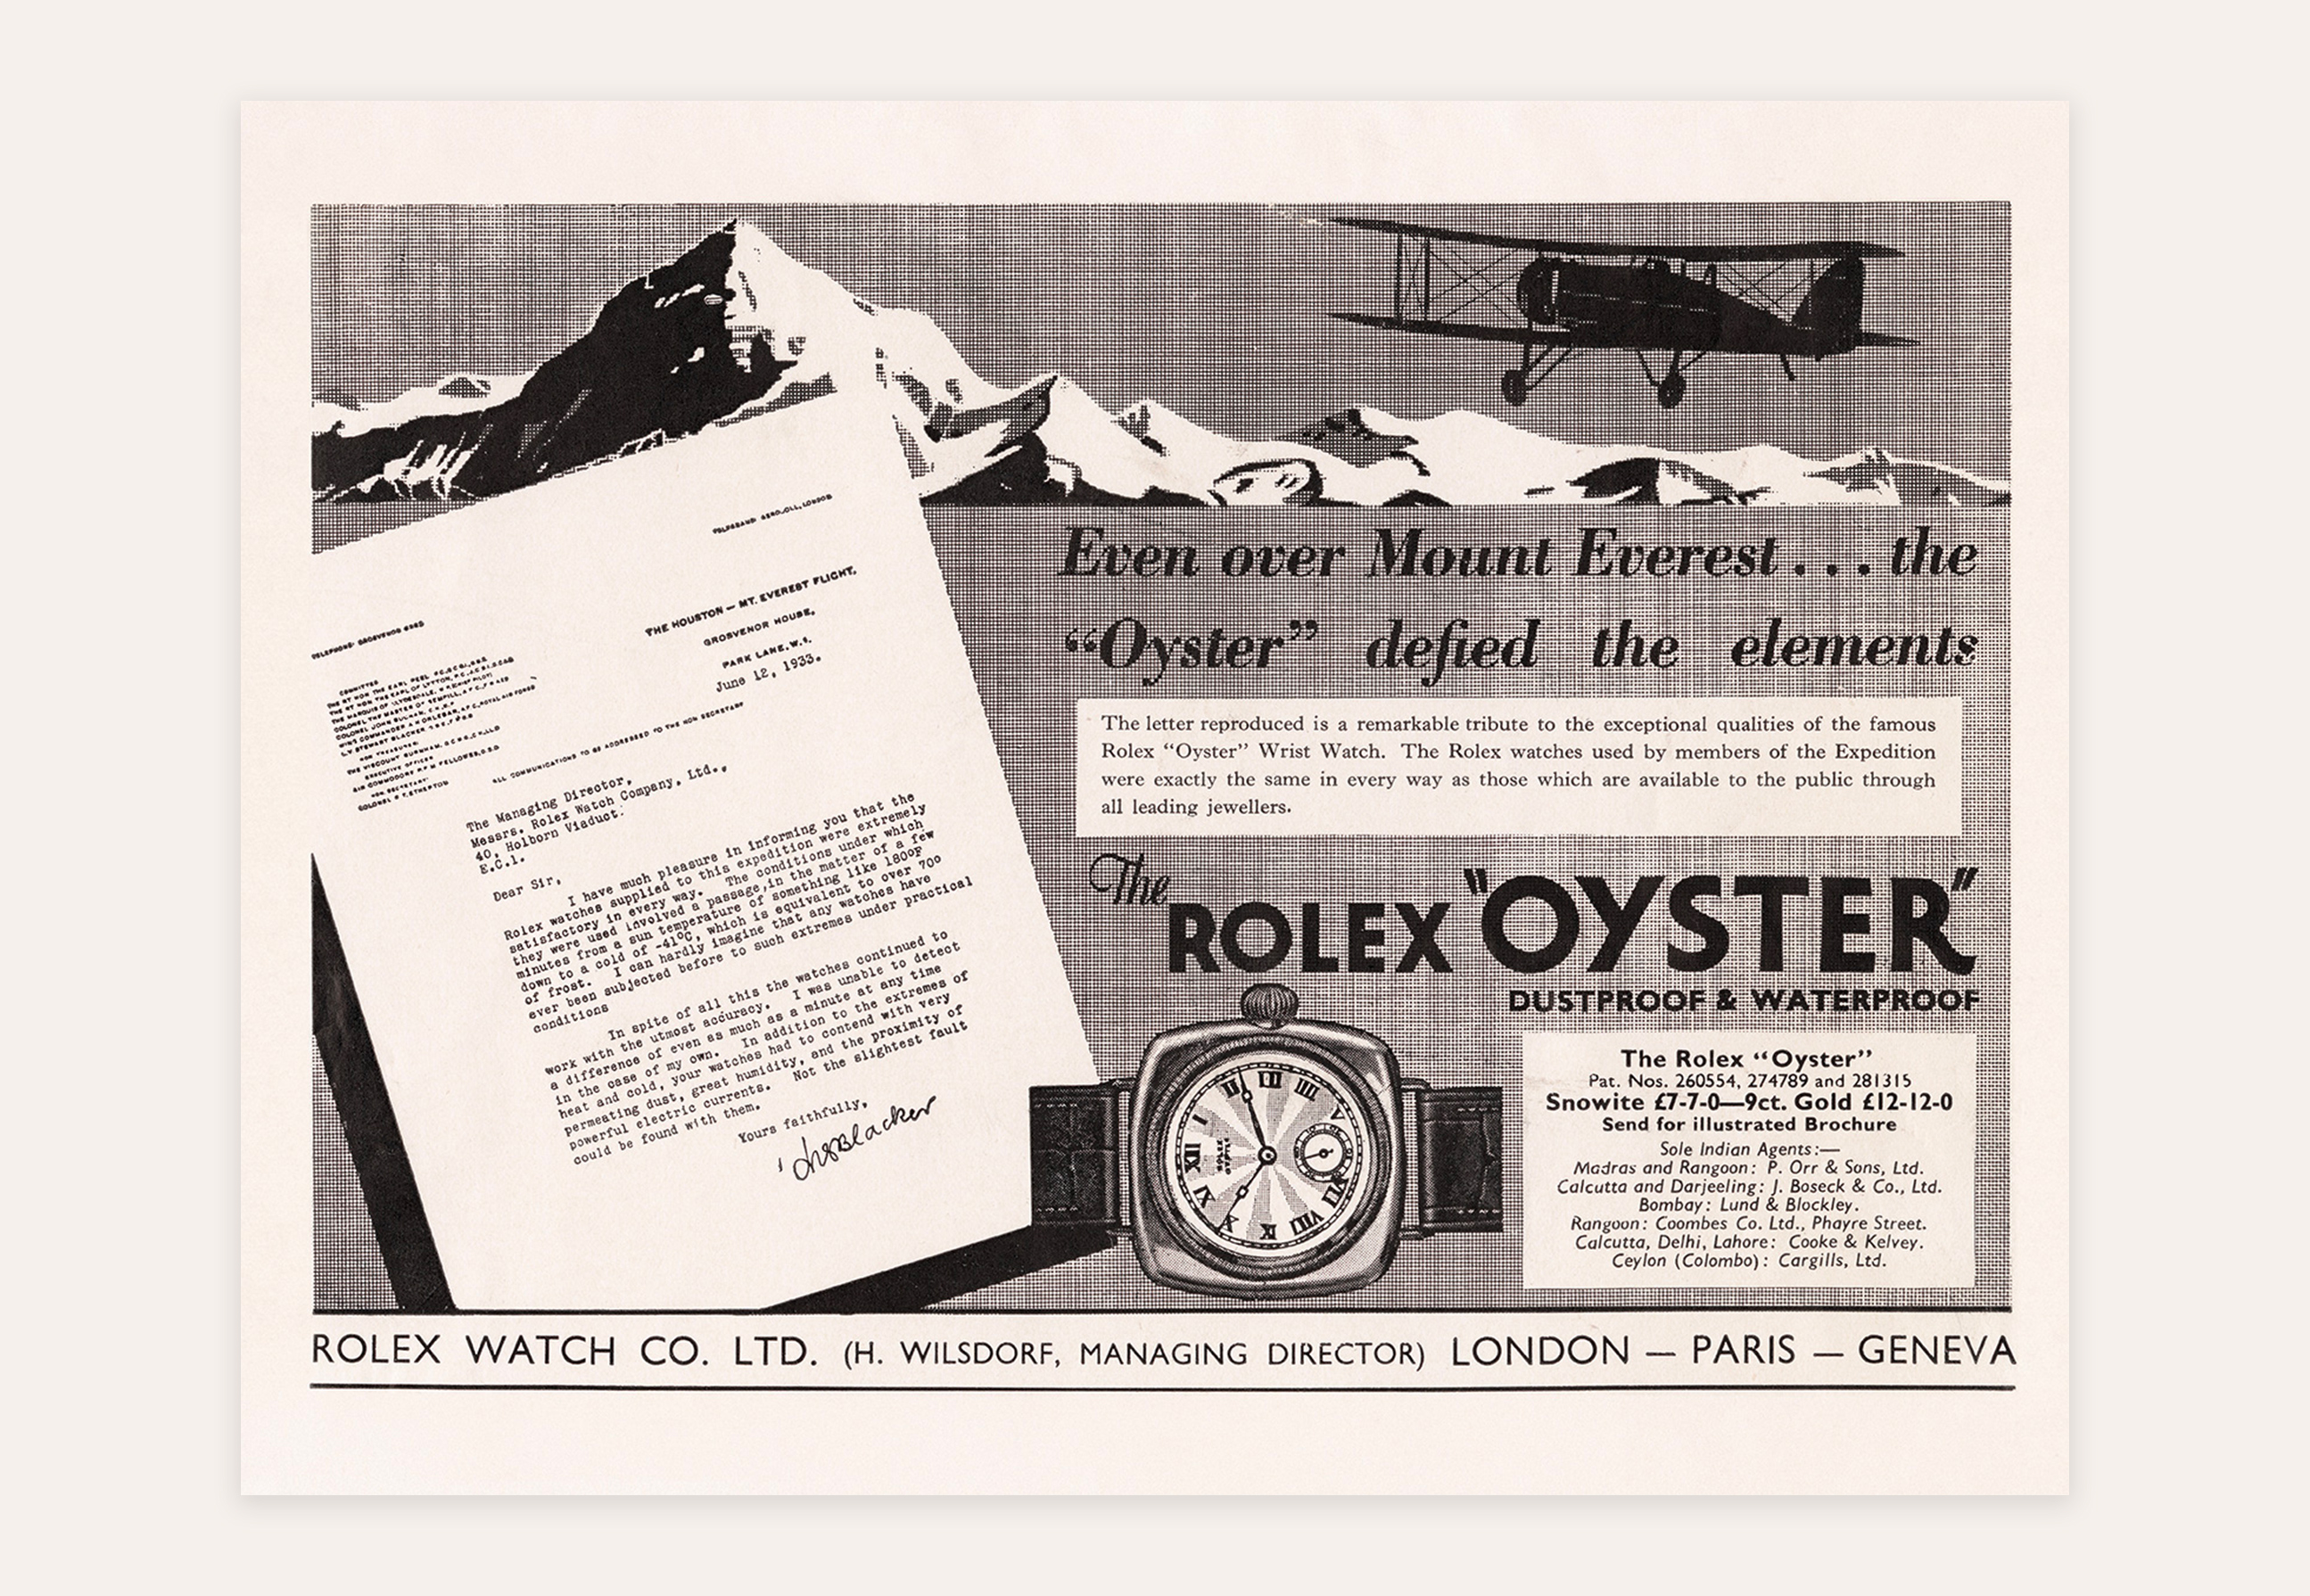 l AirKing attests to the privileged relationship between Rolex and aviation during its golden age, in the 1930s. It pays tribute to the pilots of the time and the role of the Oyster in the aerial feat.